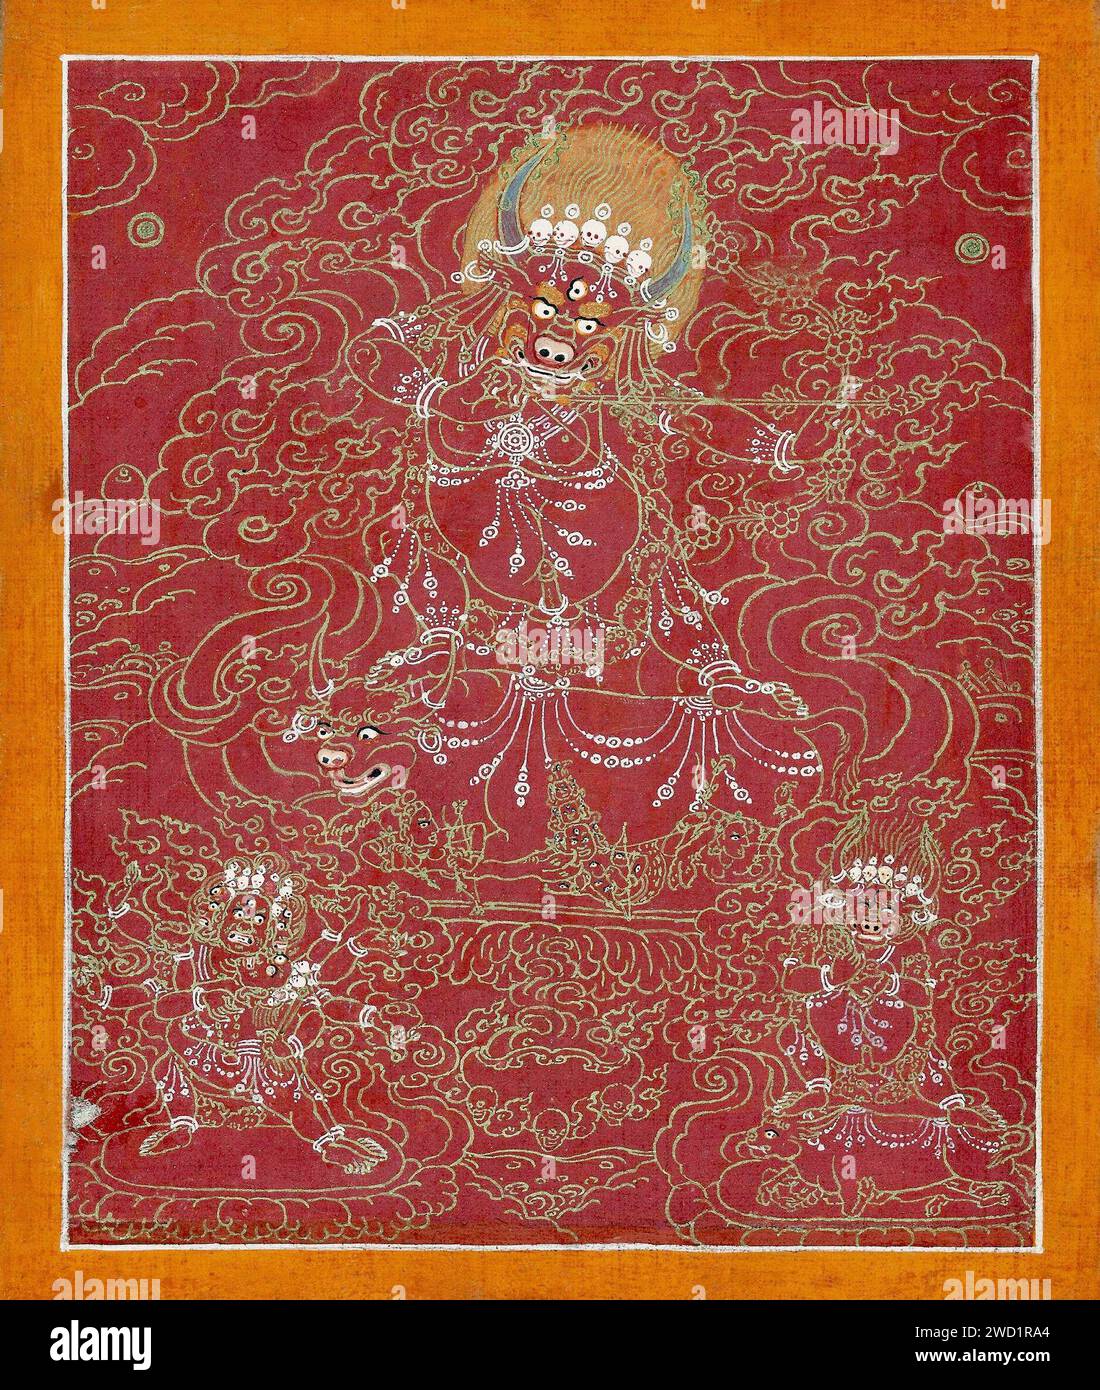 Mongolia: An ink and mineral print on canvas of Yama, the King of Hell, 19th century, Warsaw National Museum  In East Asian mythology, Yama is a dharmapala (wrathful god) and King of Hell. It is his duty to judge the dead and rule over the various hells and purgatories, presiding over the cycle of samsara (cyclic, circuitous change). Yama has spread from being a Hindu god to finding roles in Buddhism as well as in Chinese, Korean and Japanese mythology. Stock Photo